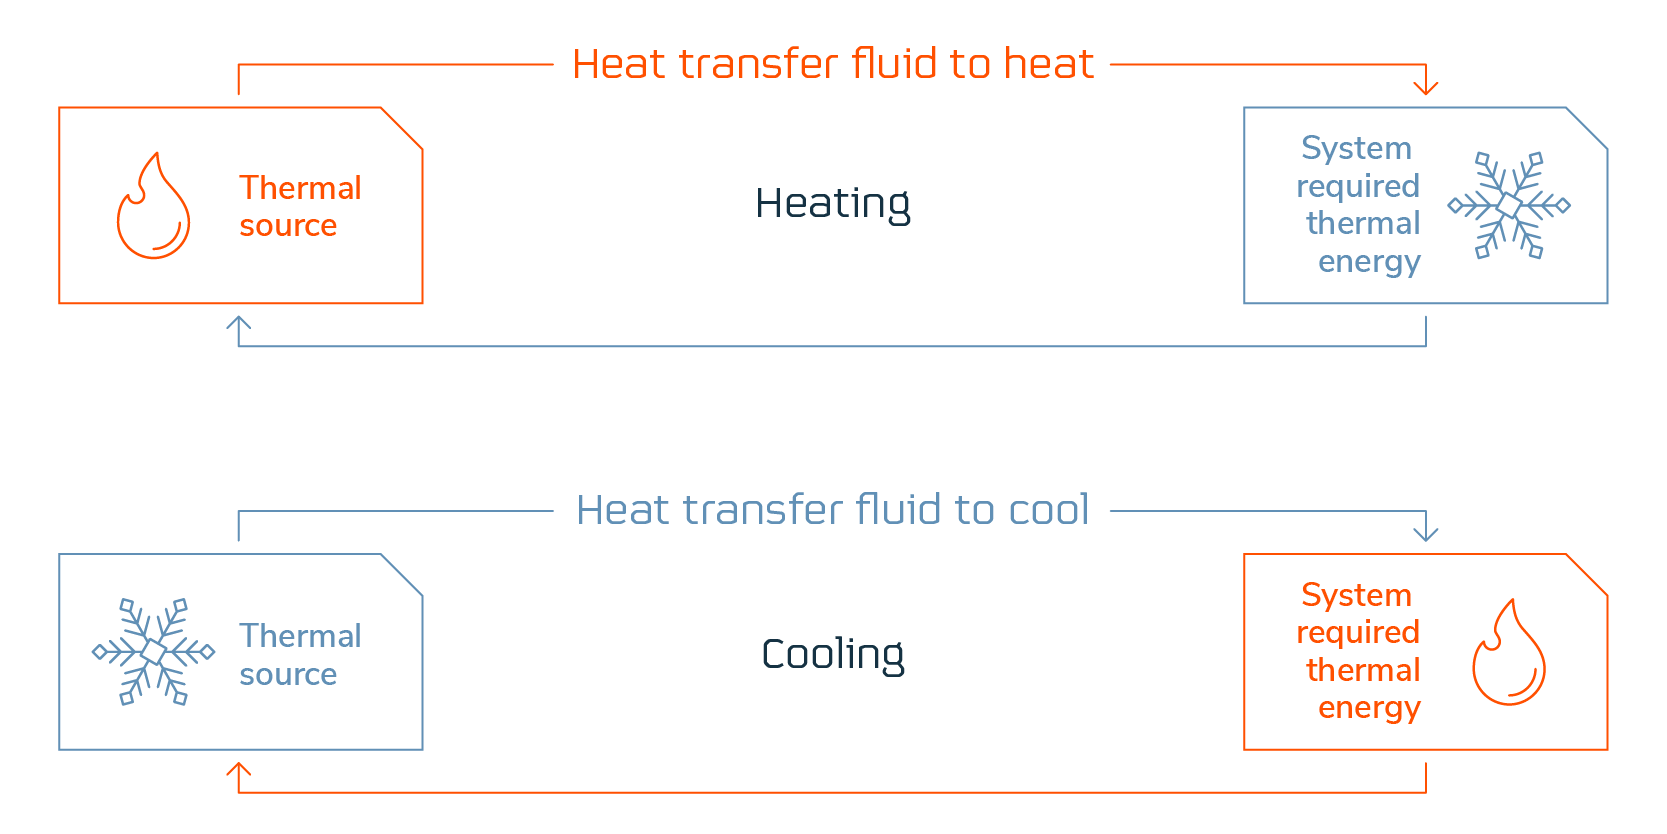 Cycle of thermal energy transfer for heating and cooling systems.